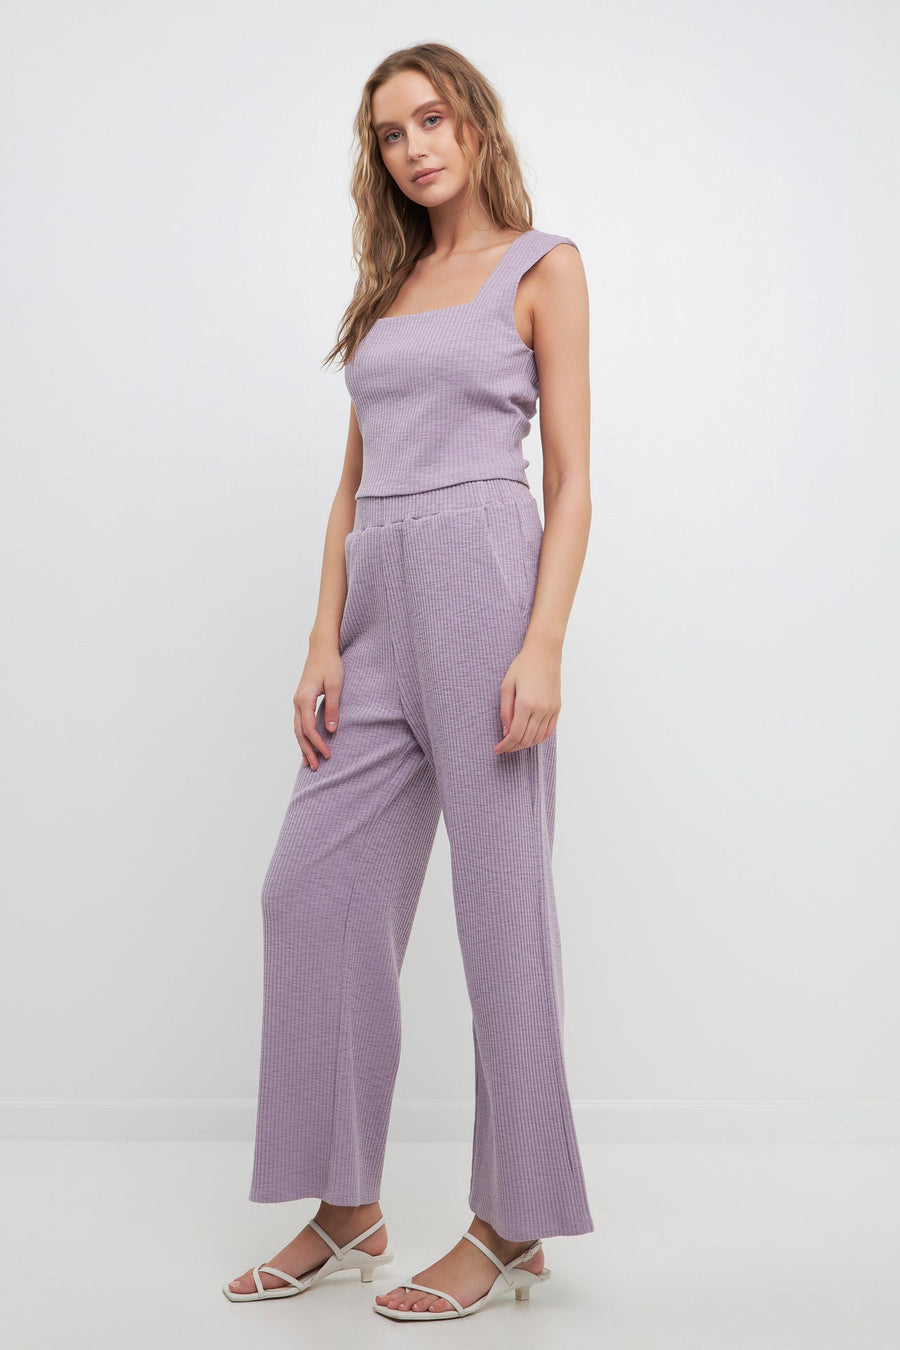 FREE THE ROSES-Loungewear Pants-PANTS available at Objectrare